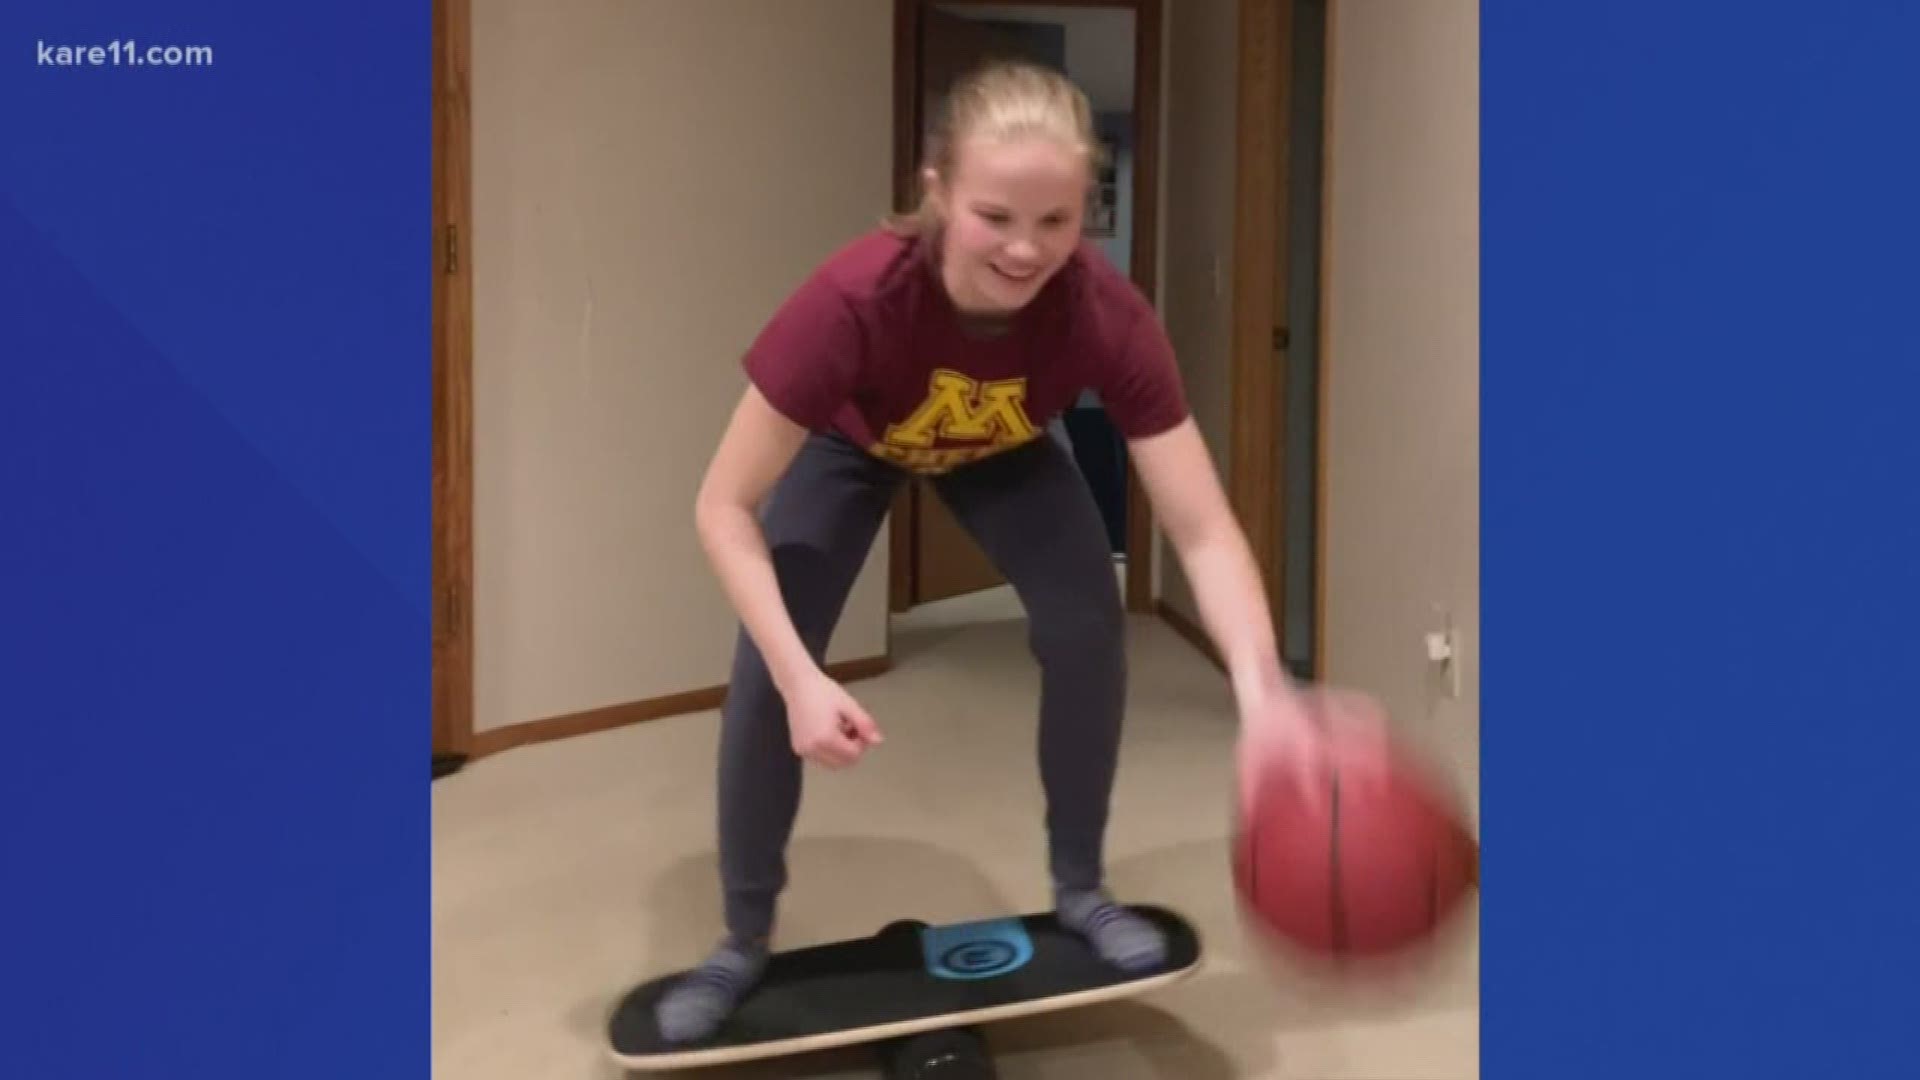 We don't have any games to watch right now but our KARE 11 viewers are working on their sports skills every night.